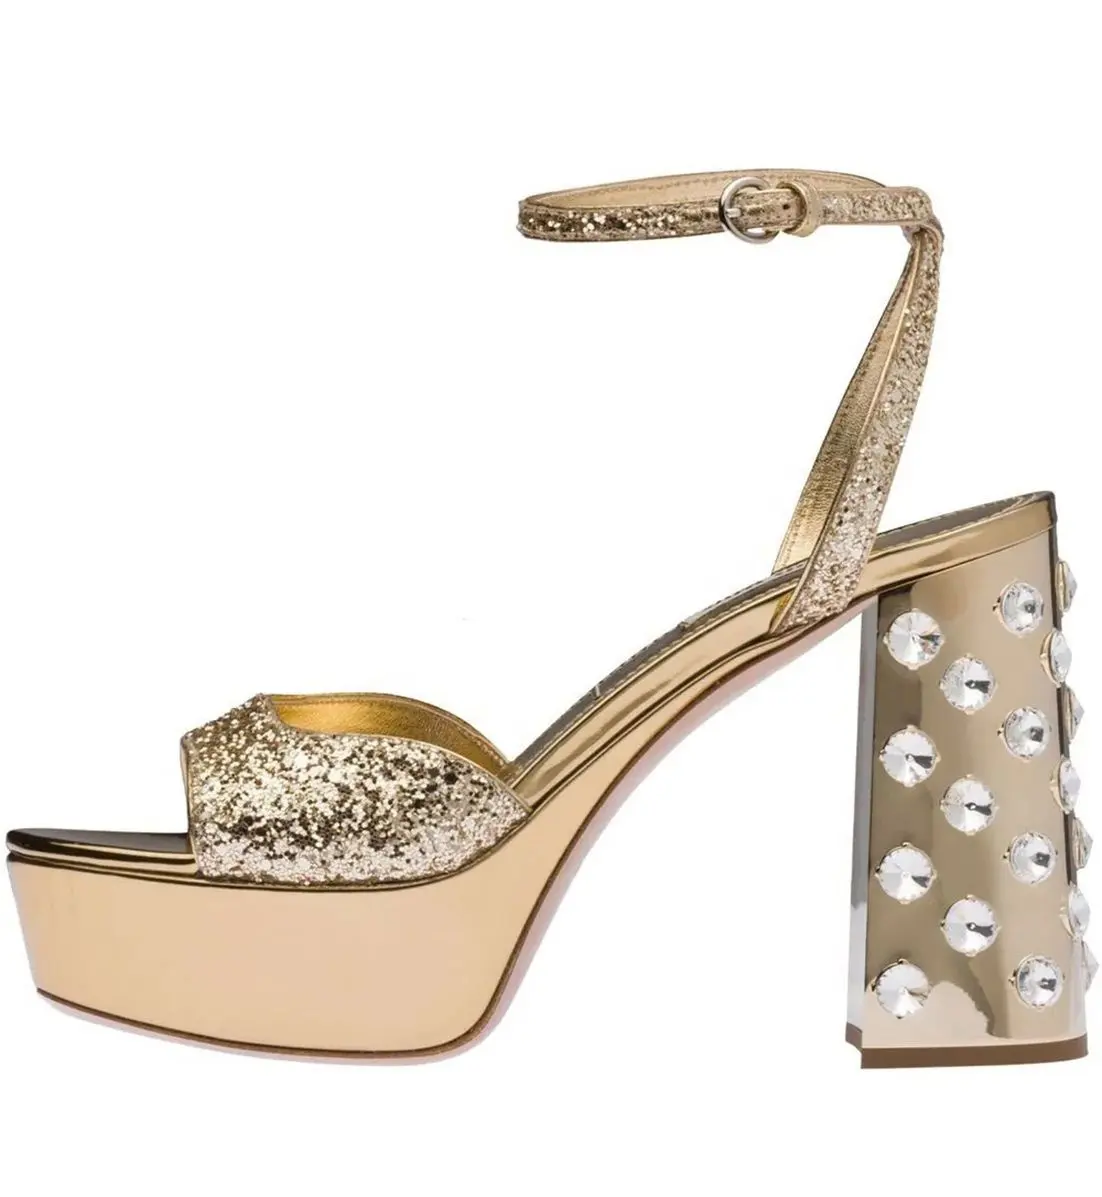 Hot Platform Shoes Party Fashion Design Gold Sexy Sequined Cloth High Heels For Ladies gold sandal glitter sandals